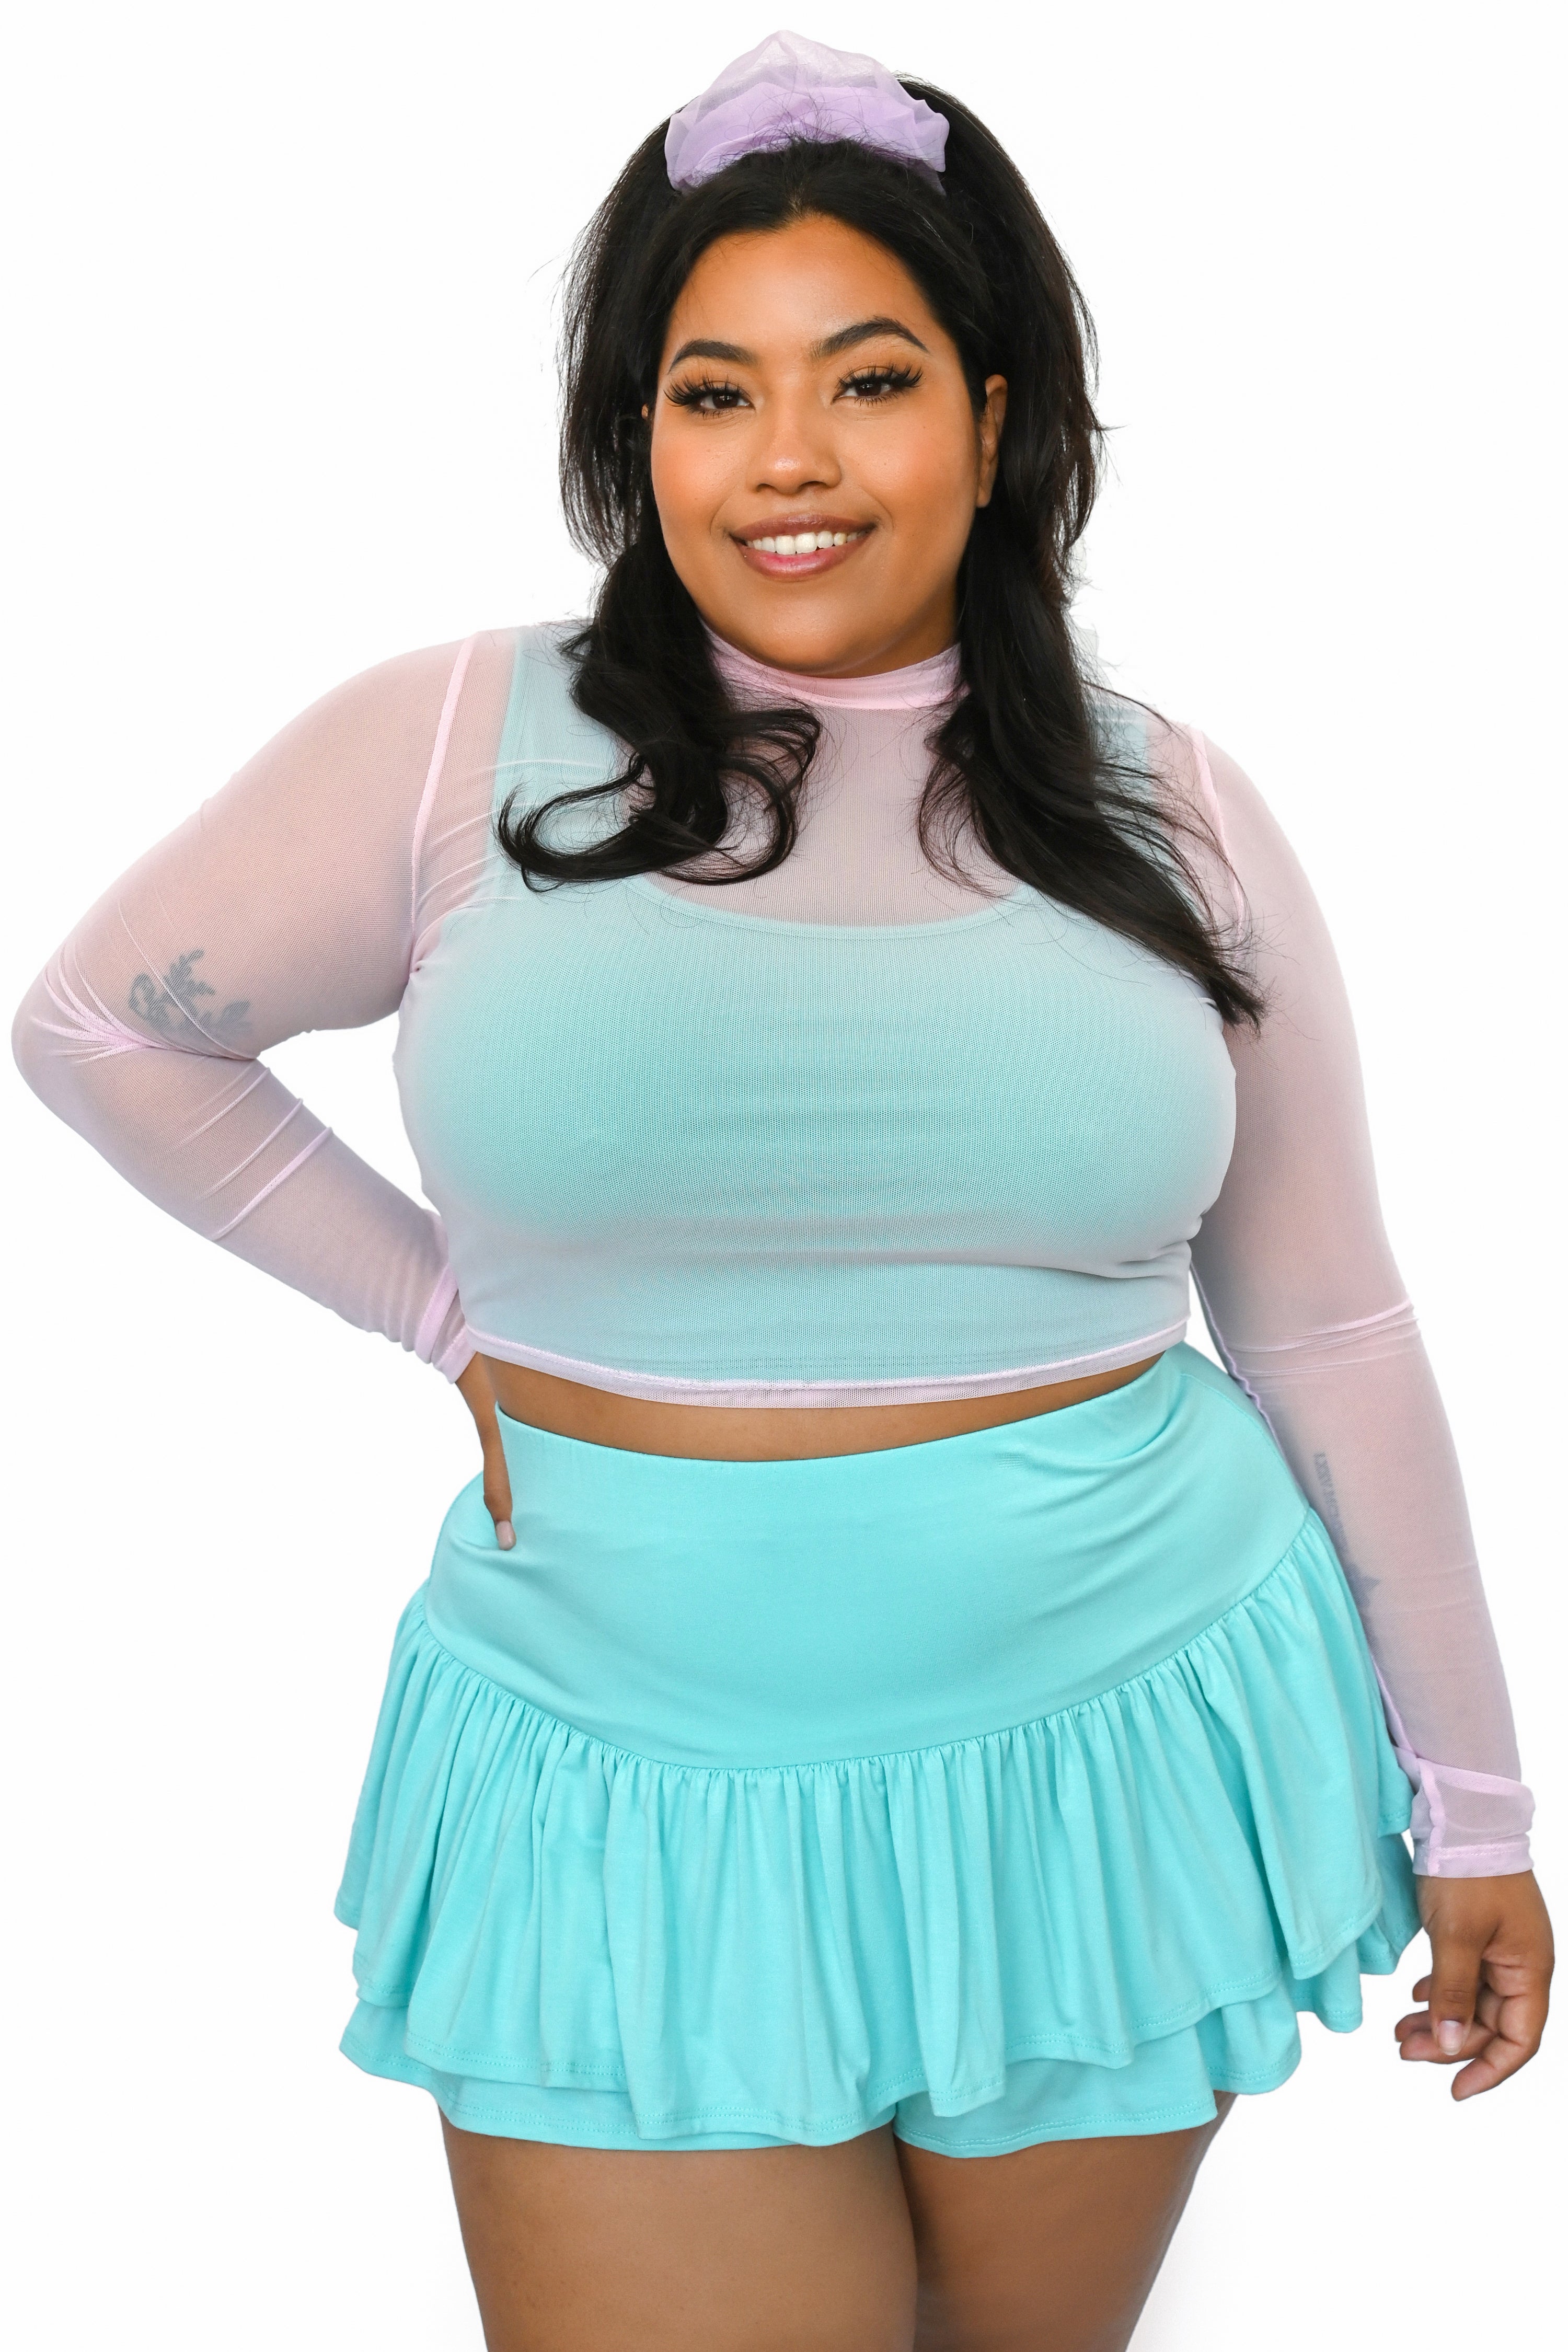 ruffle shorts with a layer to make them look like a skirt! in aqua blue